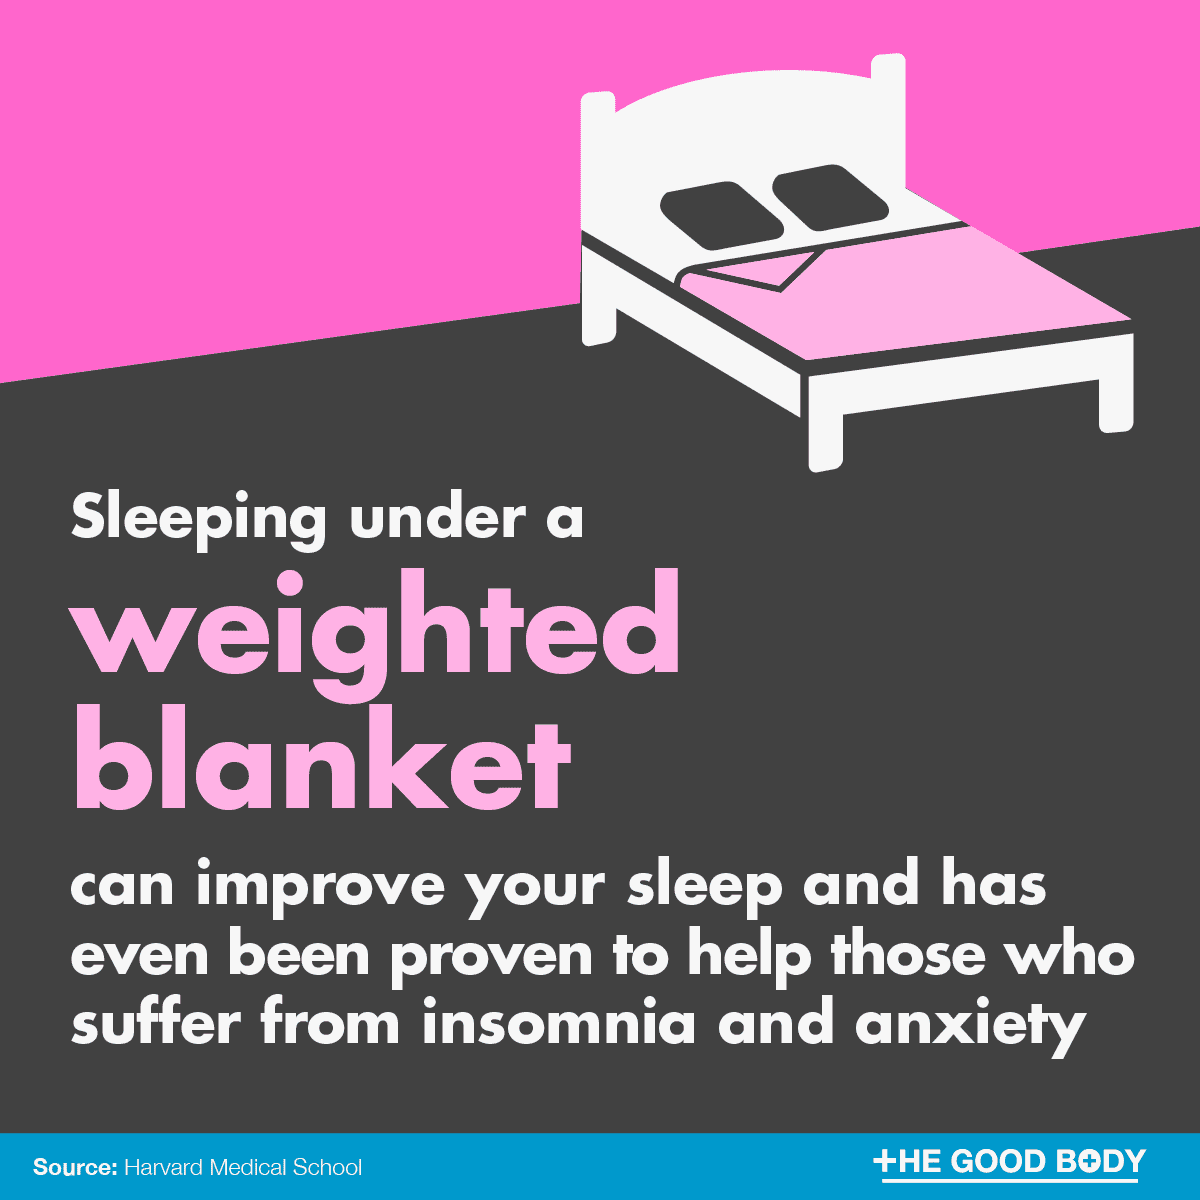 Infographic: Sleeping under a weighted blanket can improve your sleep and has even been proven to help those who suffer from insomnia and anxiety